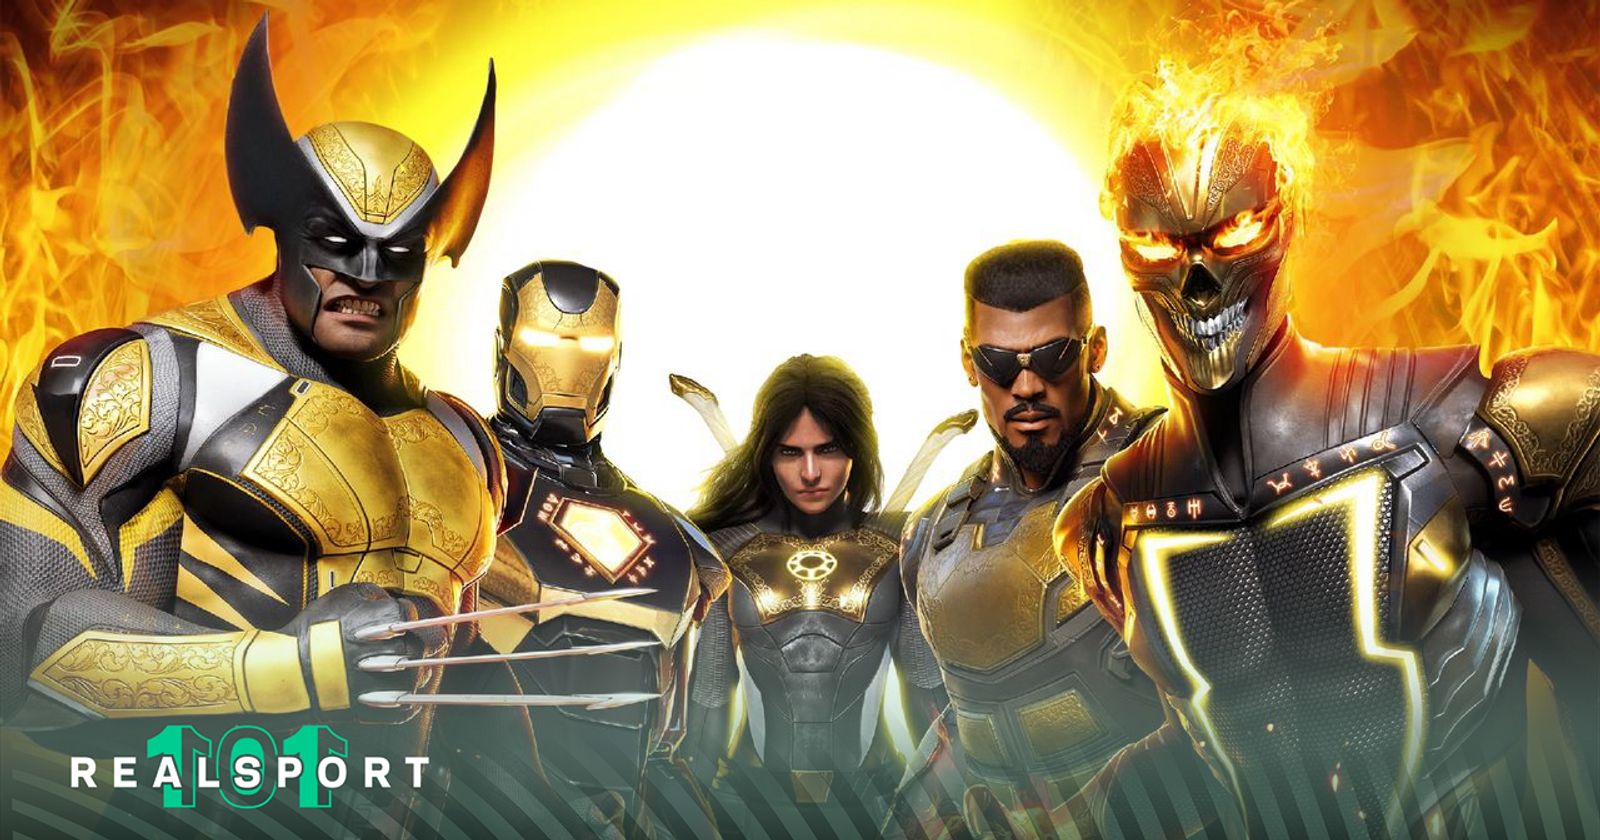 What to Expect From Marvel's Midnight Suns' Final Storm DLC